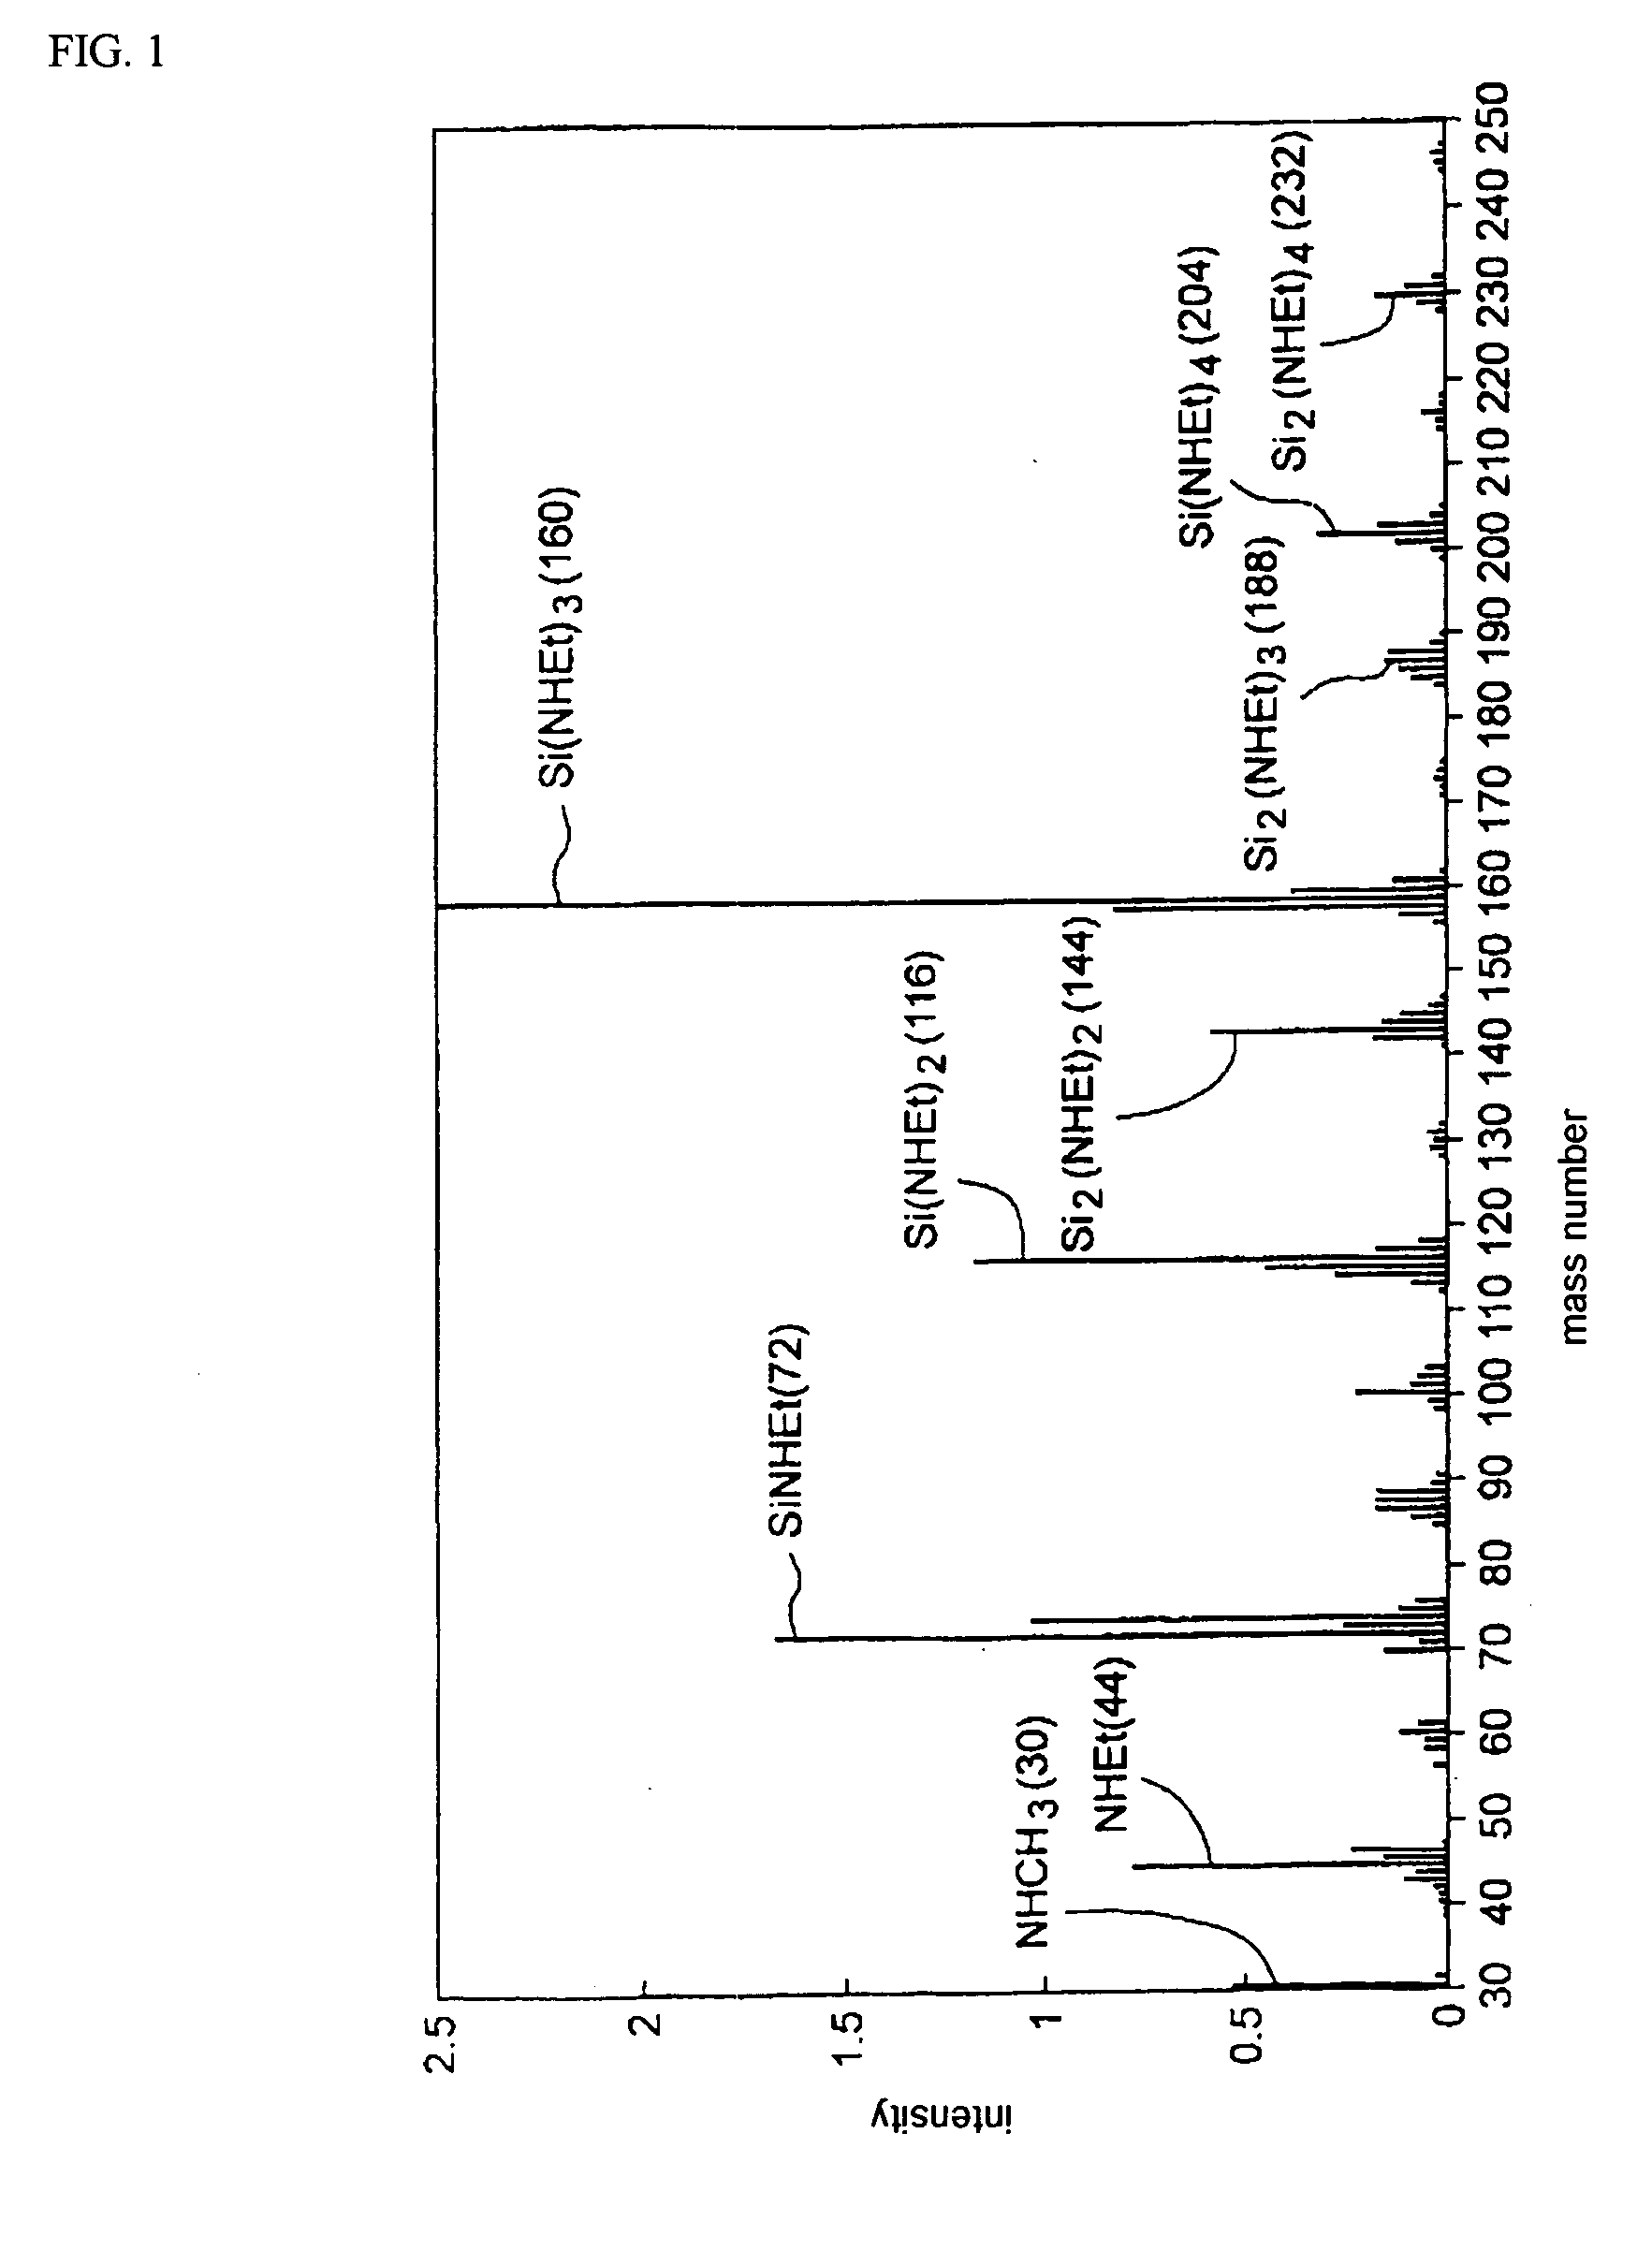 Hexakis(monohydrocarbylamino) disilanes and method for the preparation thereof